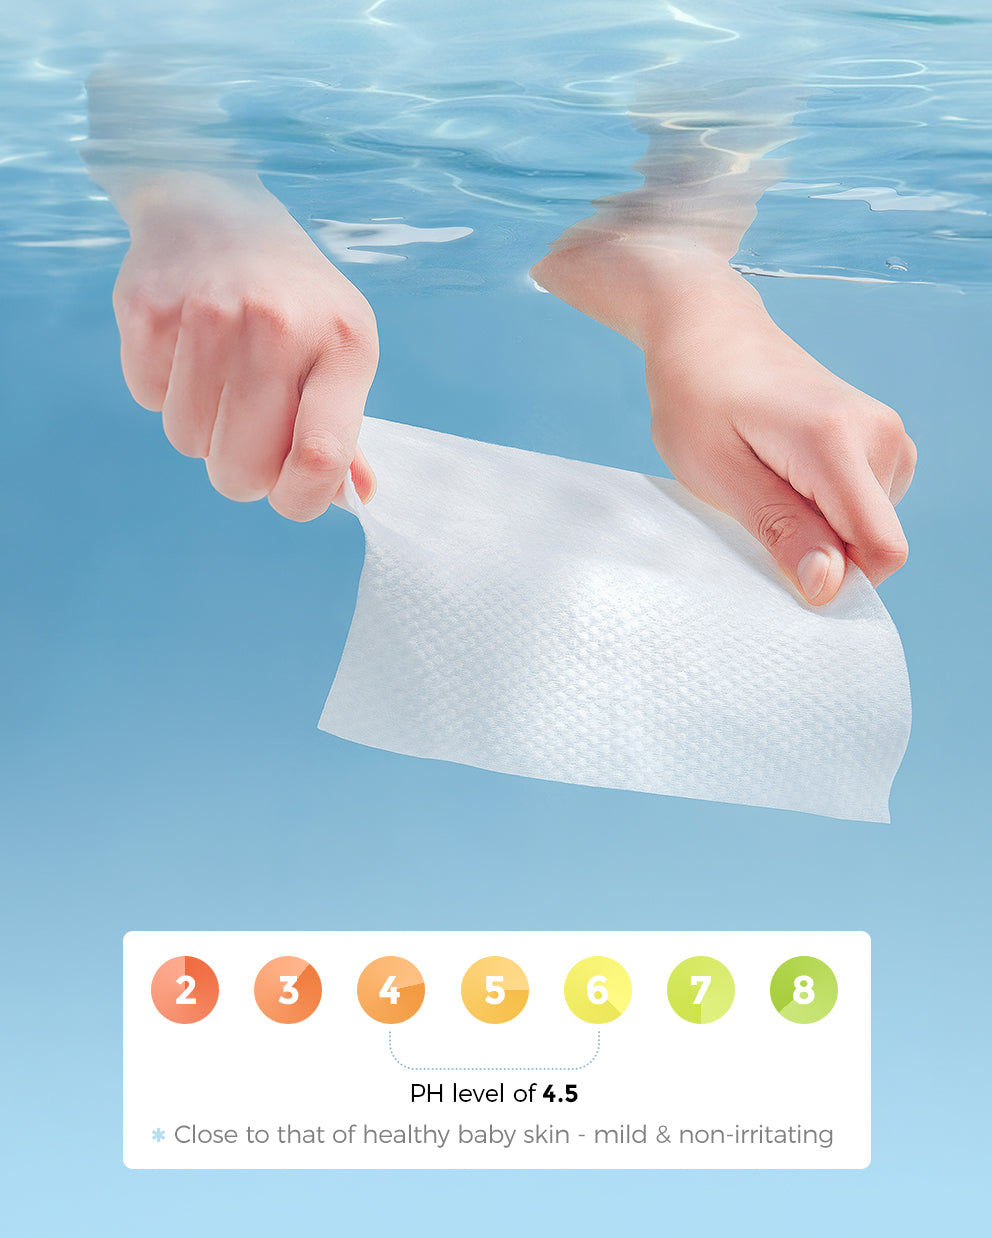 Water Wipes - Higher Level of Purity